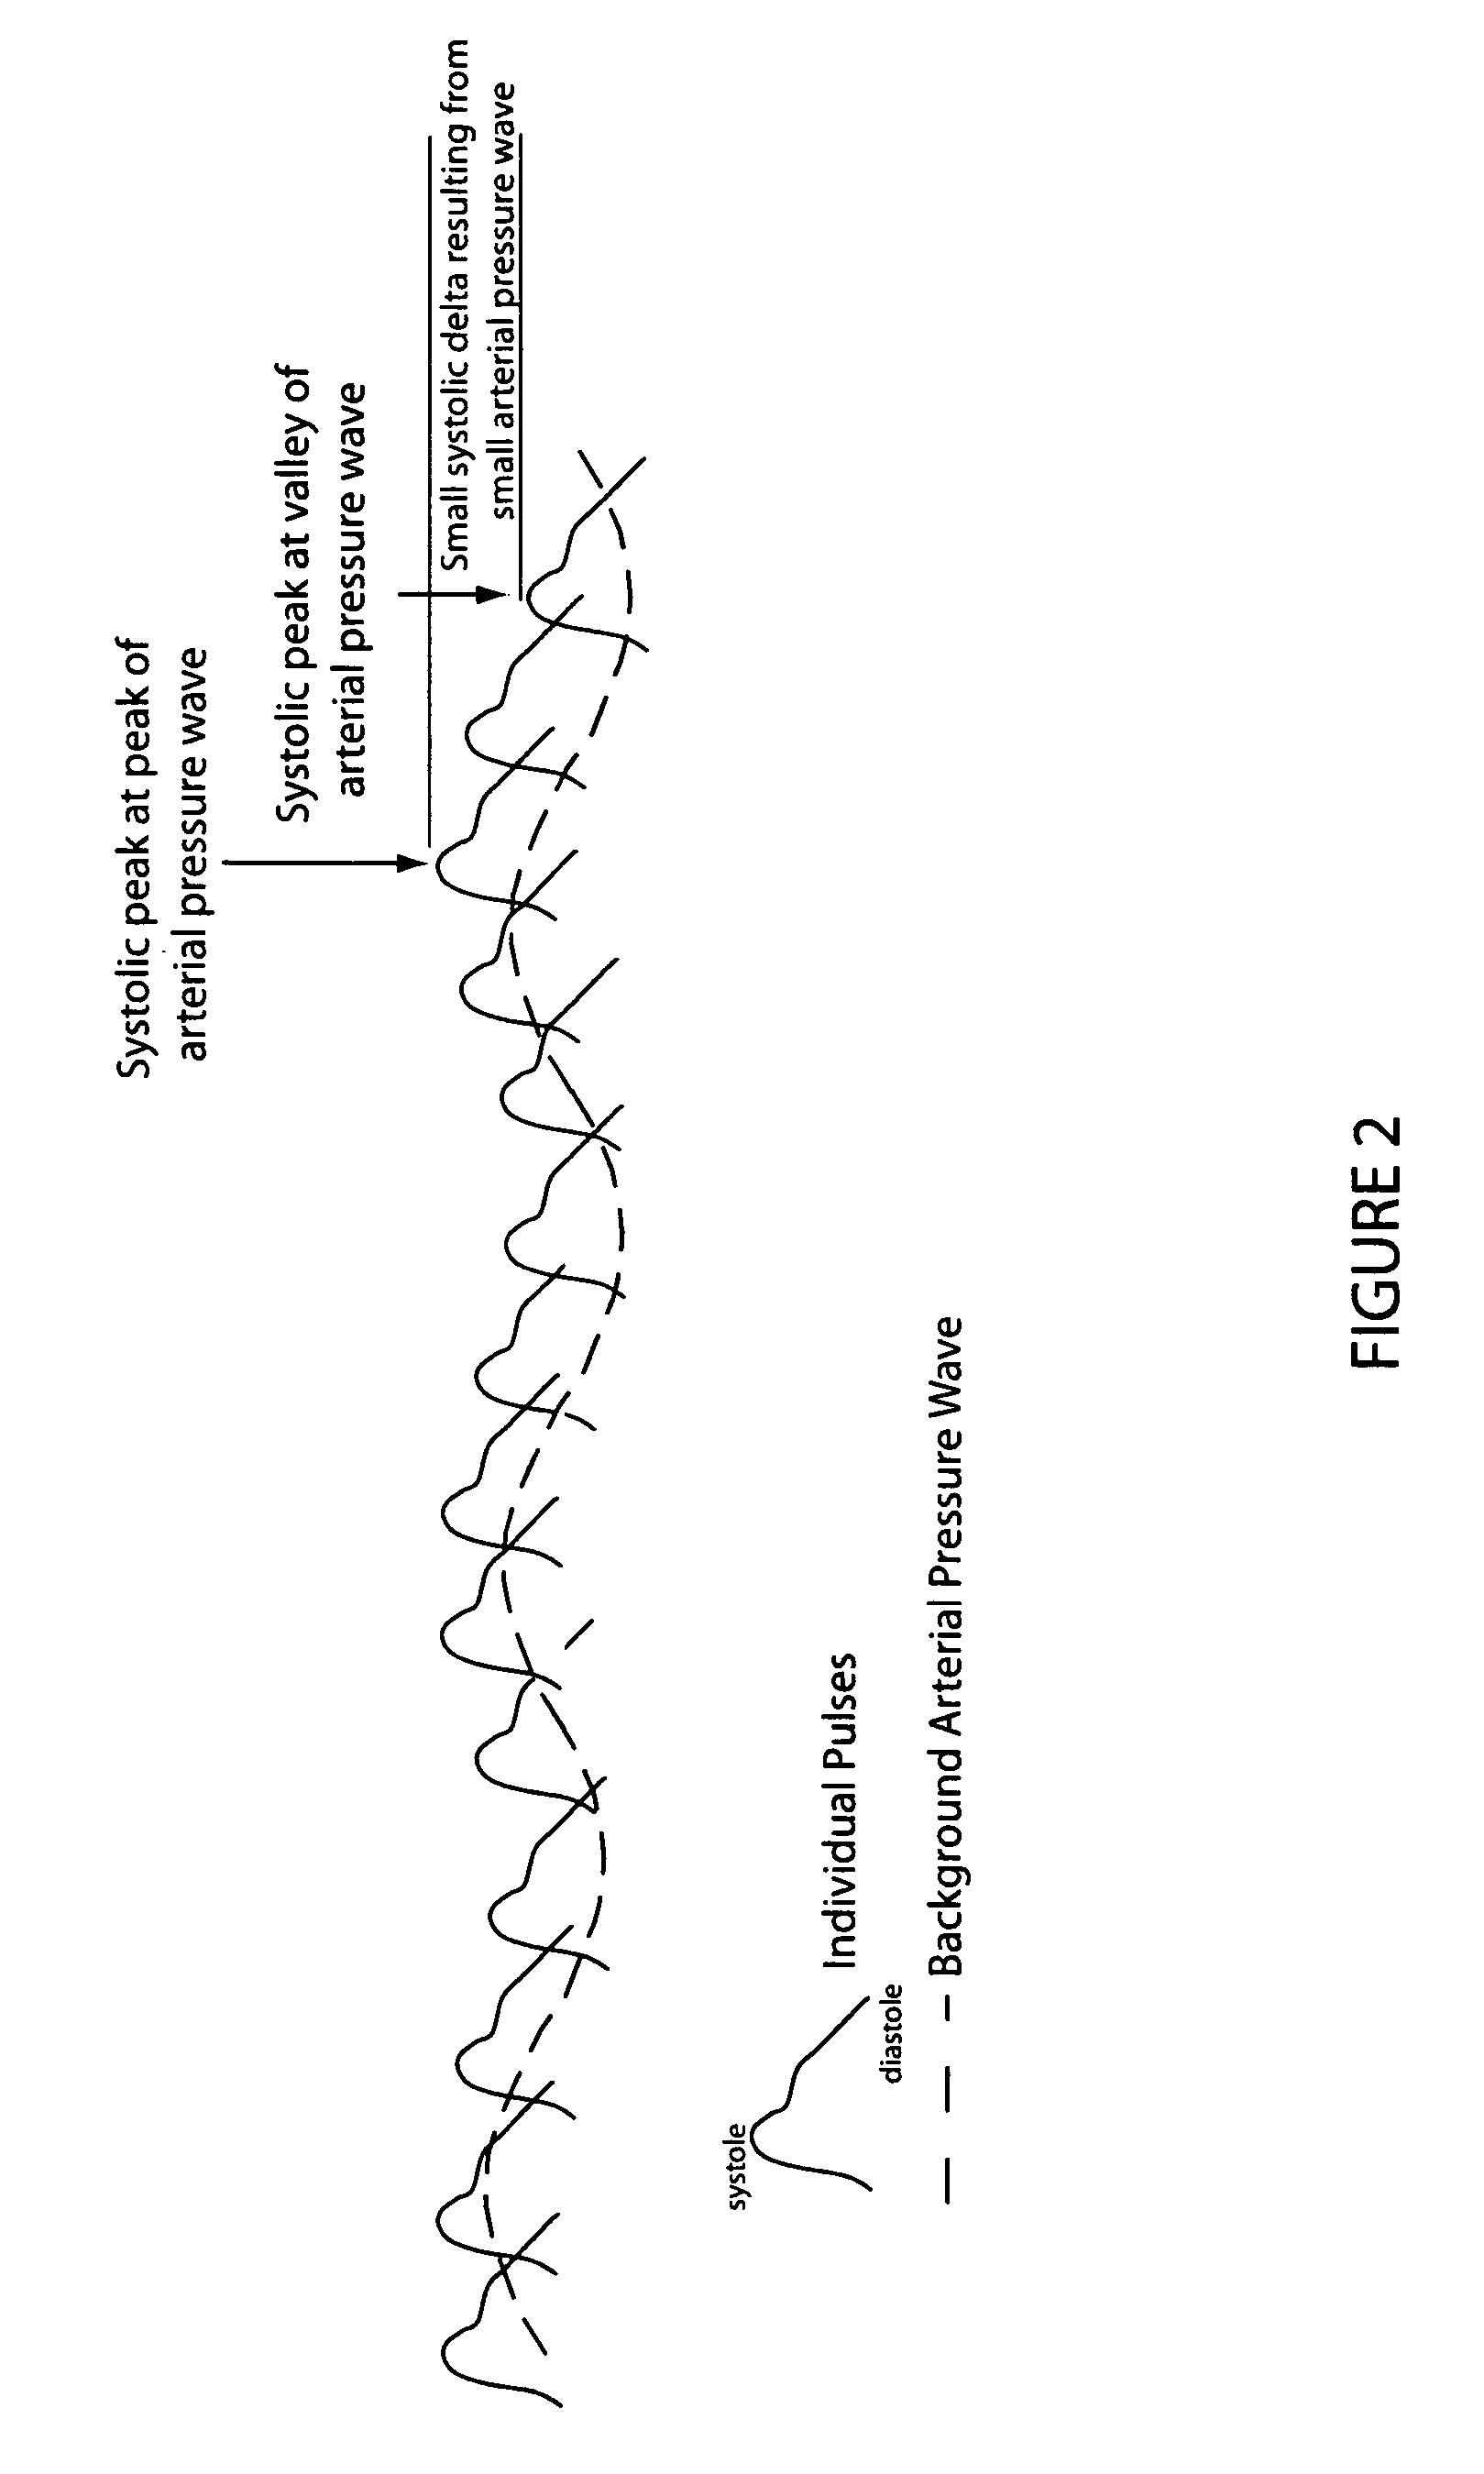 Method and system for assessing breathing effectiveness via assessment of the dynamic arterial pressure wave using the oscillometric measurement technique